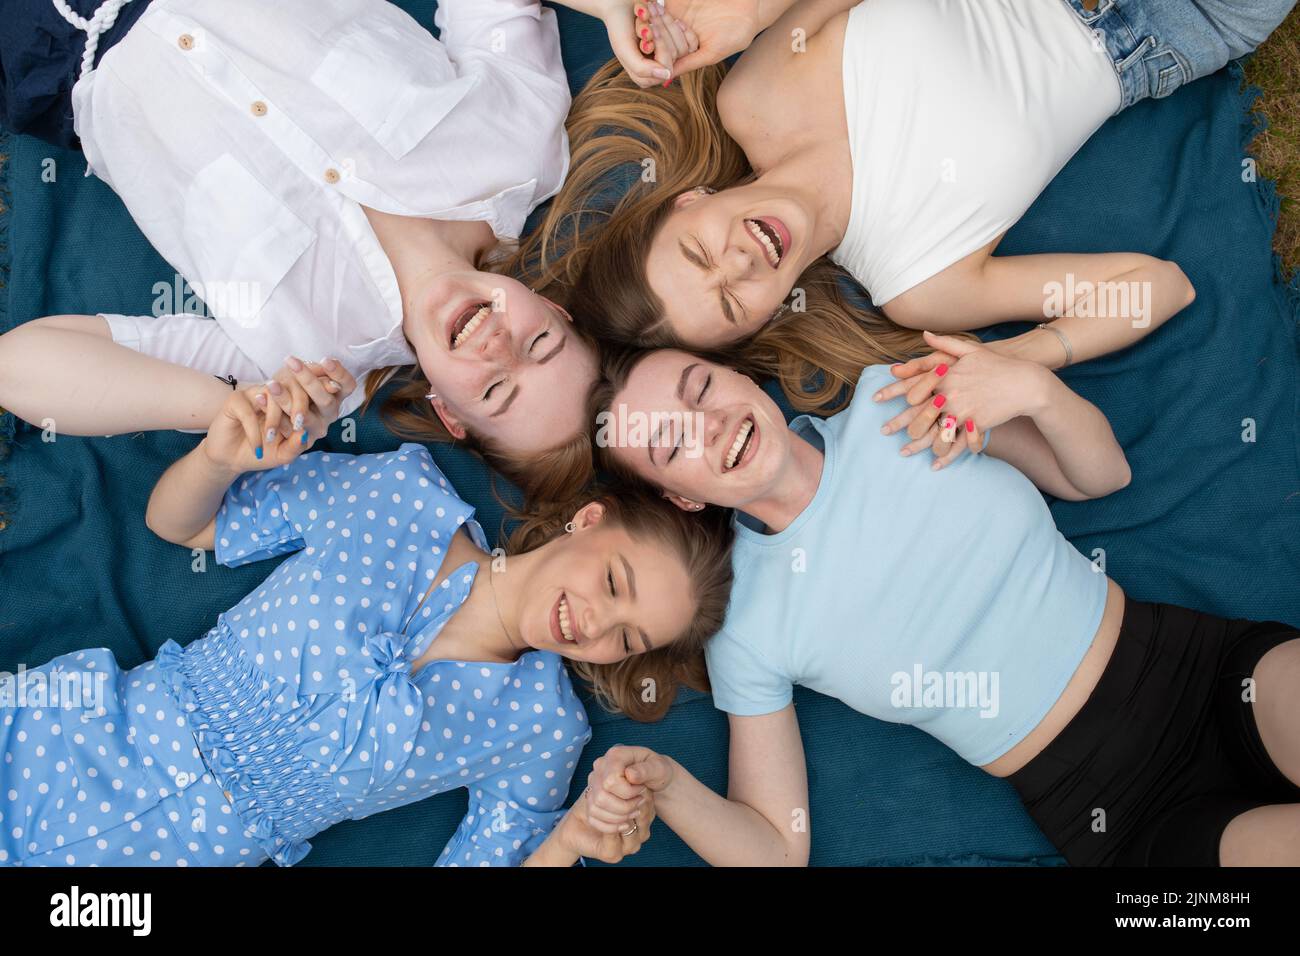 Top view of young laughing stunning women holding hands together, lying in circle on blue blanket with closed eyes. Stock Photo